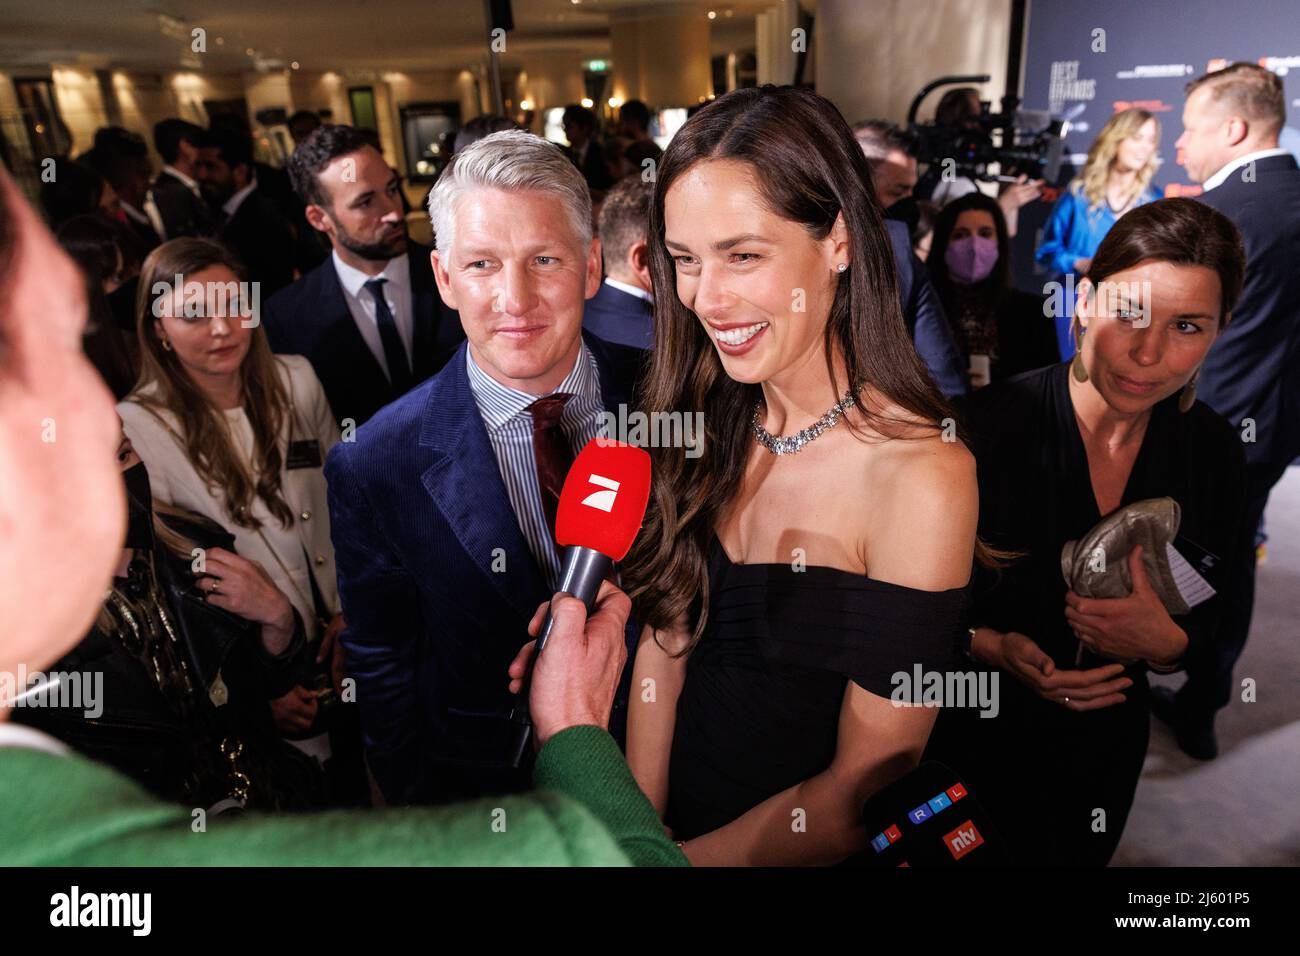 Munich, Germany. 26th Apr, 2022. Bastian Schweinsteiger, former German soccer player, and his wife Ana Ivanovic, Serbian former tennis player, arrive at the Best Brands Awards 2022 ceremony at the Bayerischer Hof. Credit: Matthias Balk/dpa/Alamy Live News Stock Photo